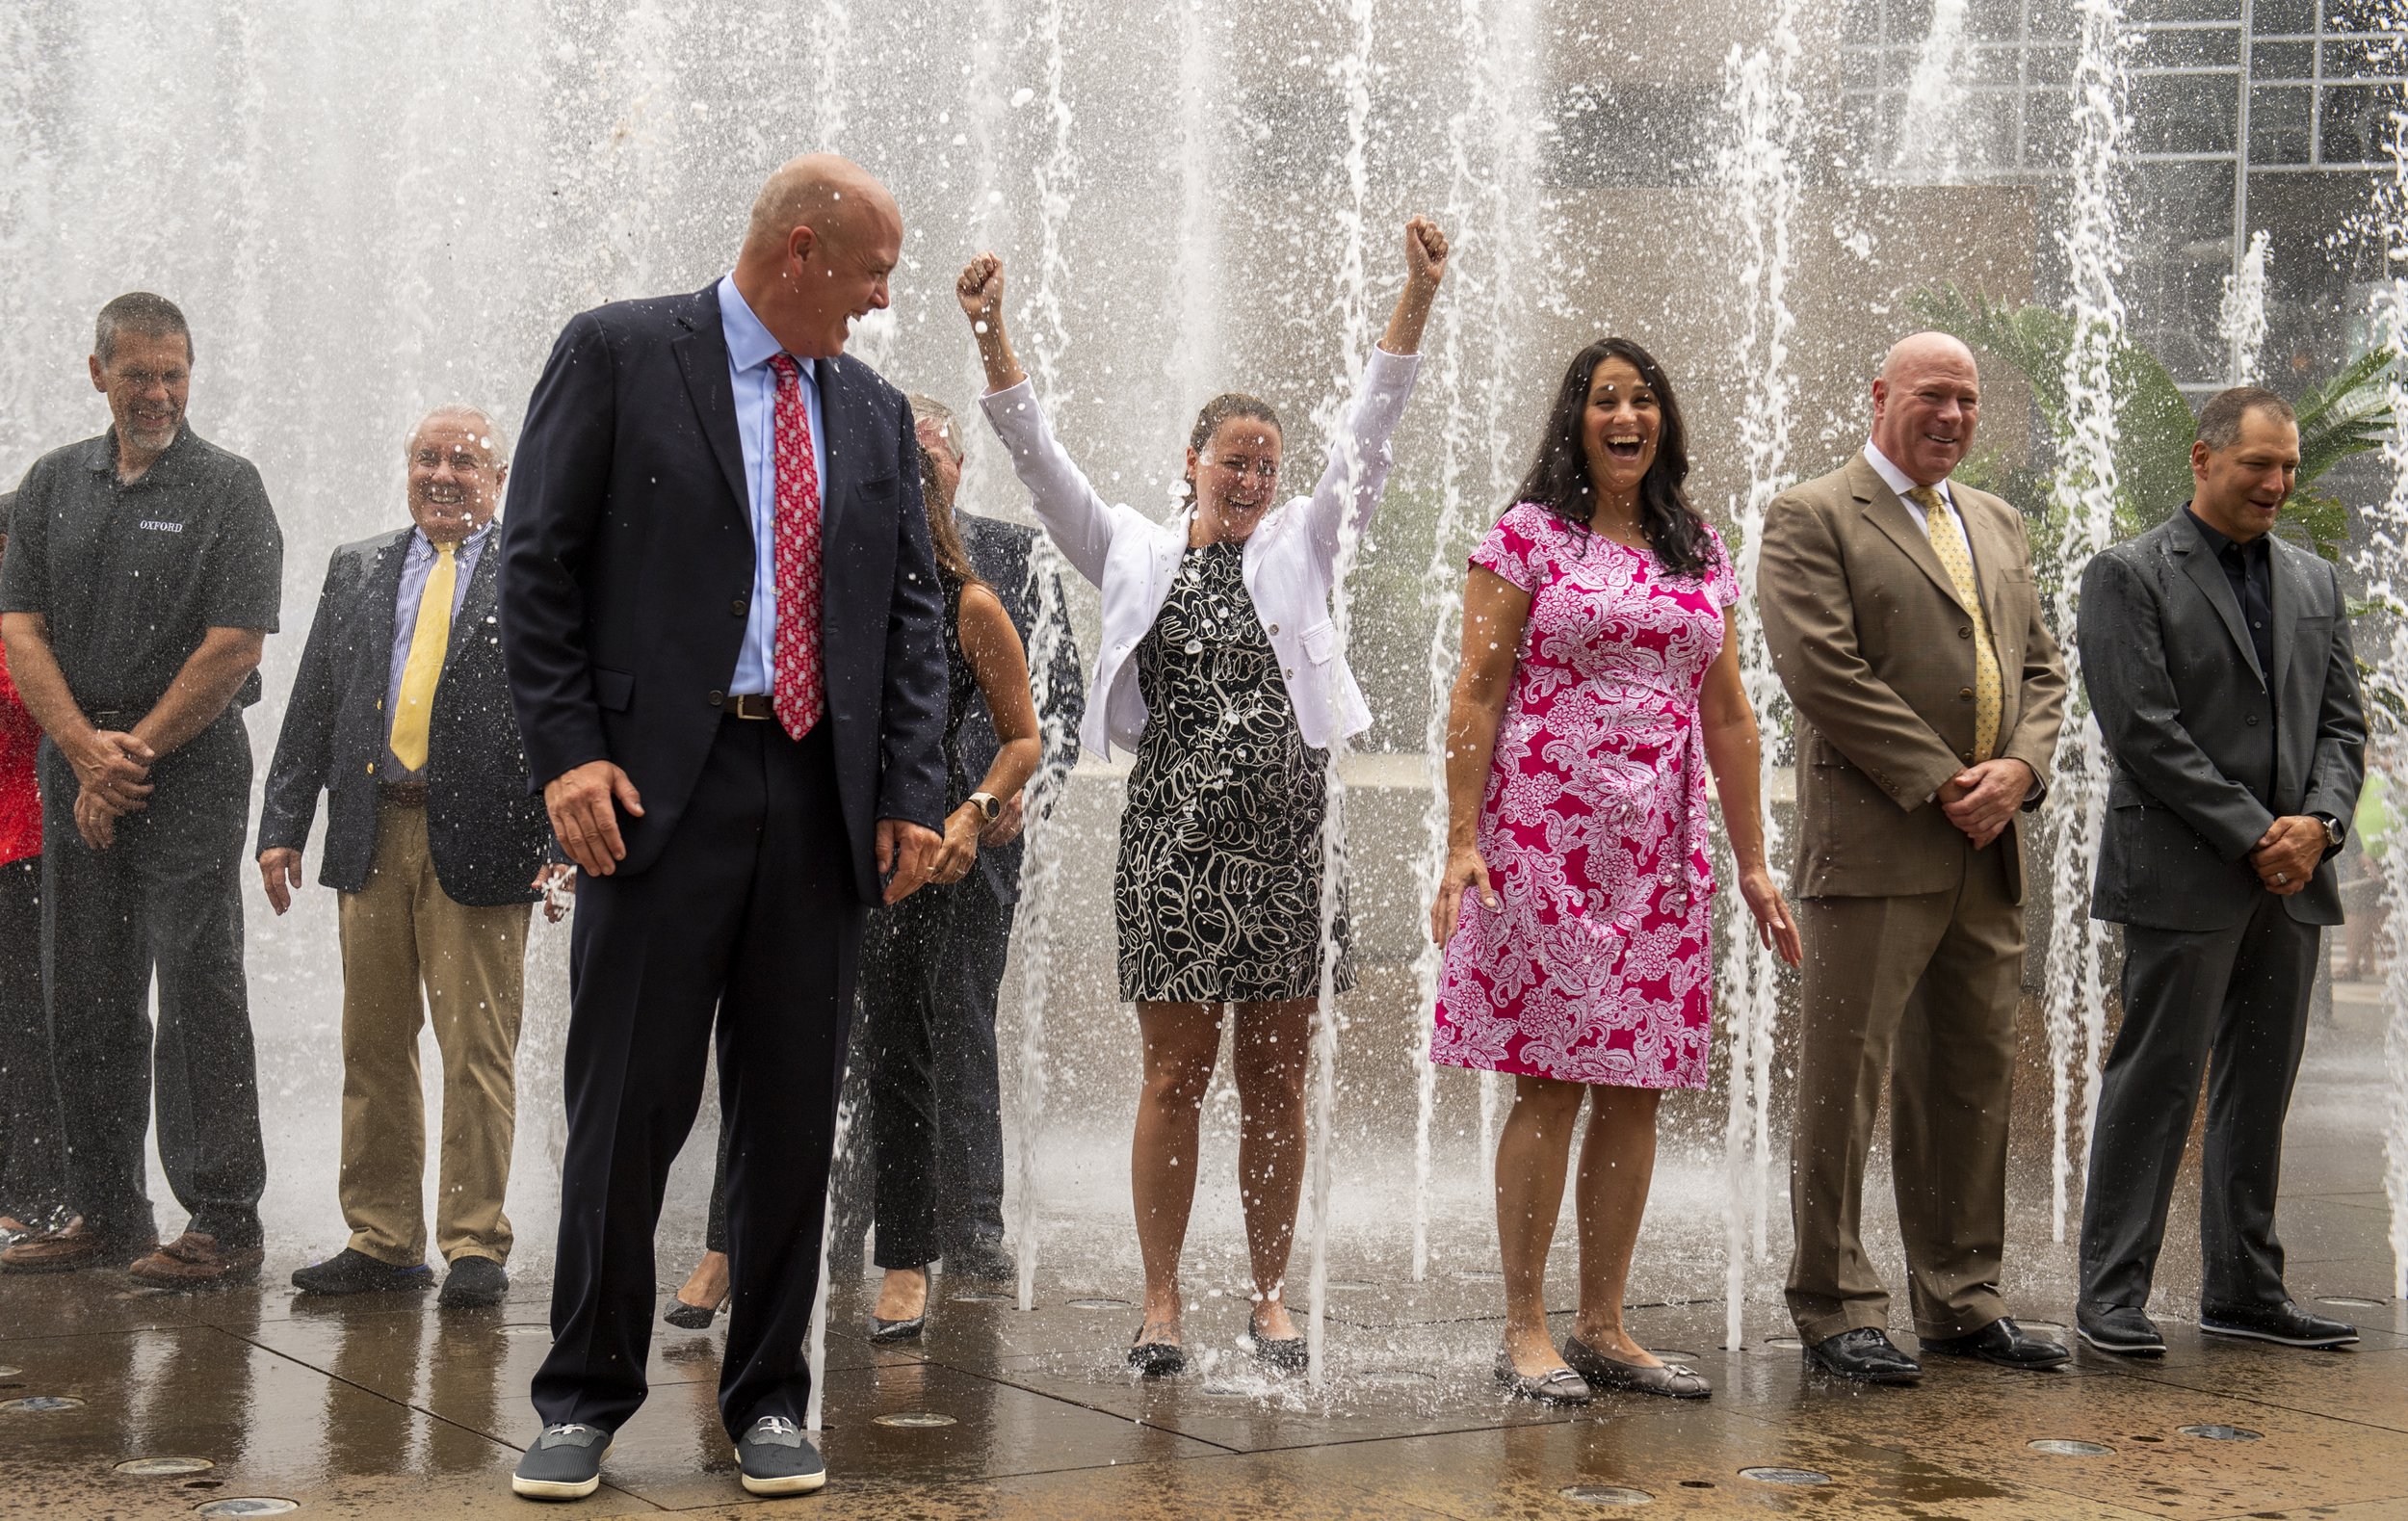  Don Belt stands in front of other executives in the PPG Place fountain during the CEO Soak for ALS (amyotrophic lateral sclerosis) fundraiser on August 12, 2021, in Downtown Pittsburgh, Pa. 